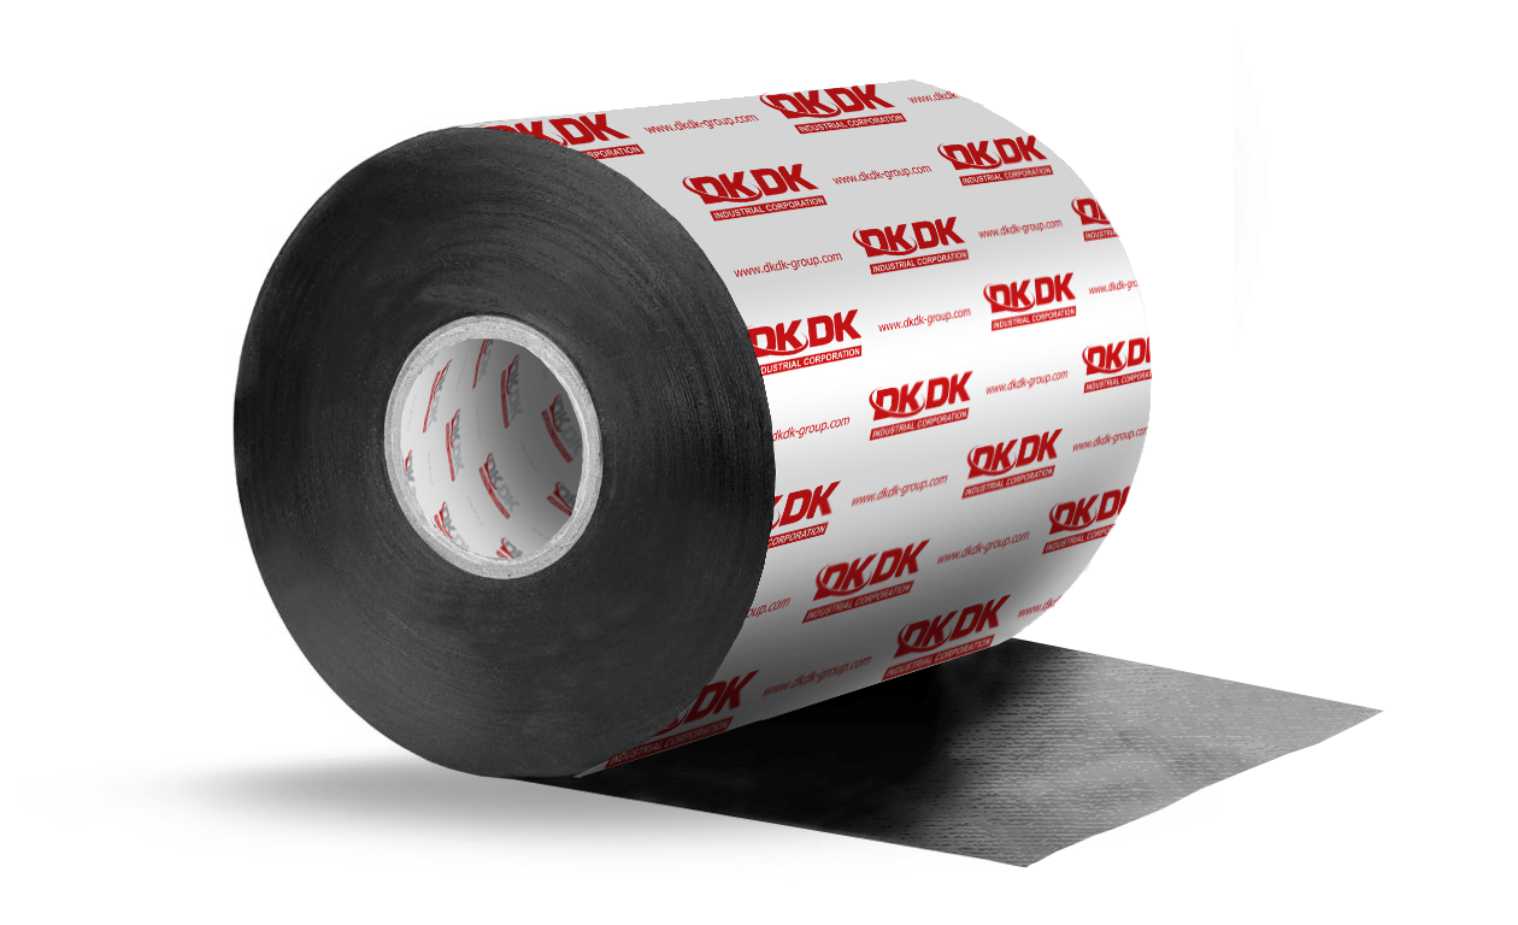 Illustration insulation JOIN WRAP DK-BUT®HB1000 ROLL